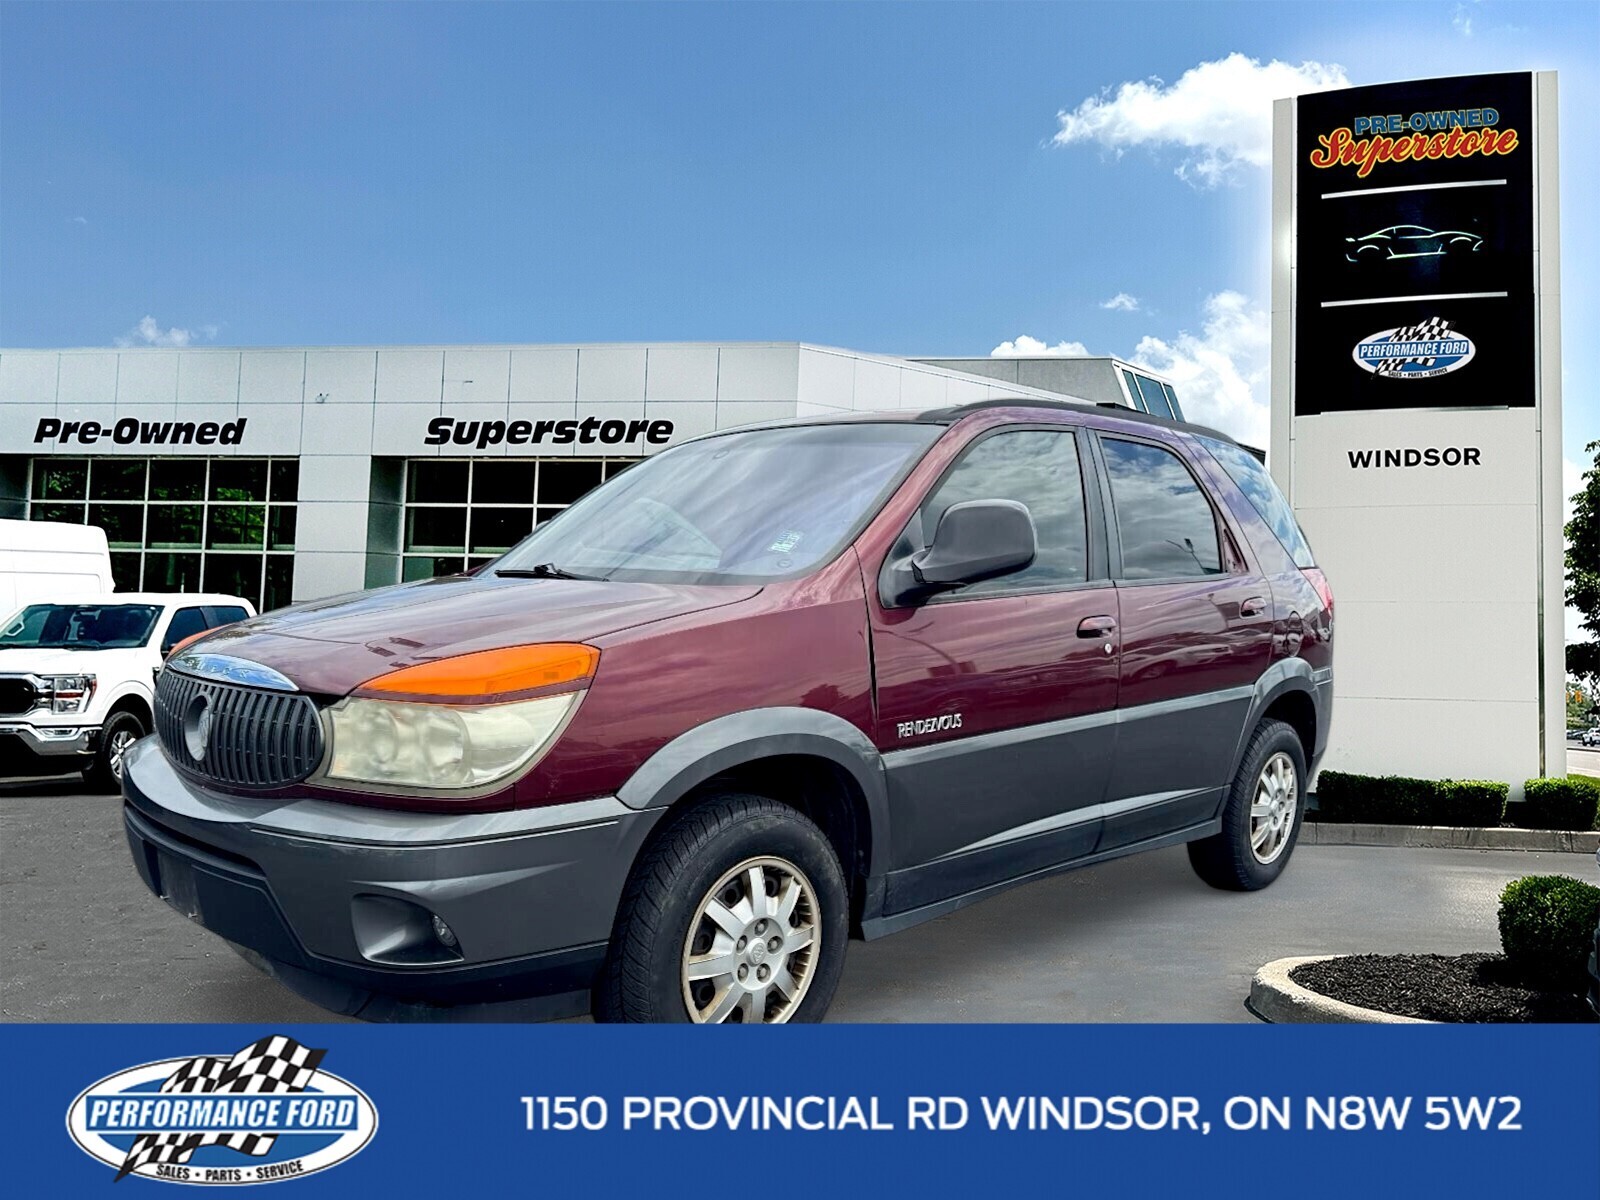 2002 Buick Rendezvous as is